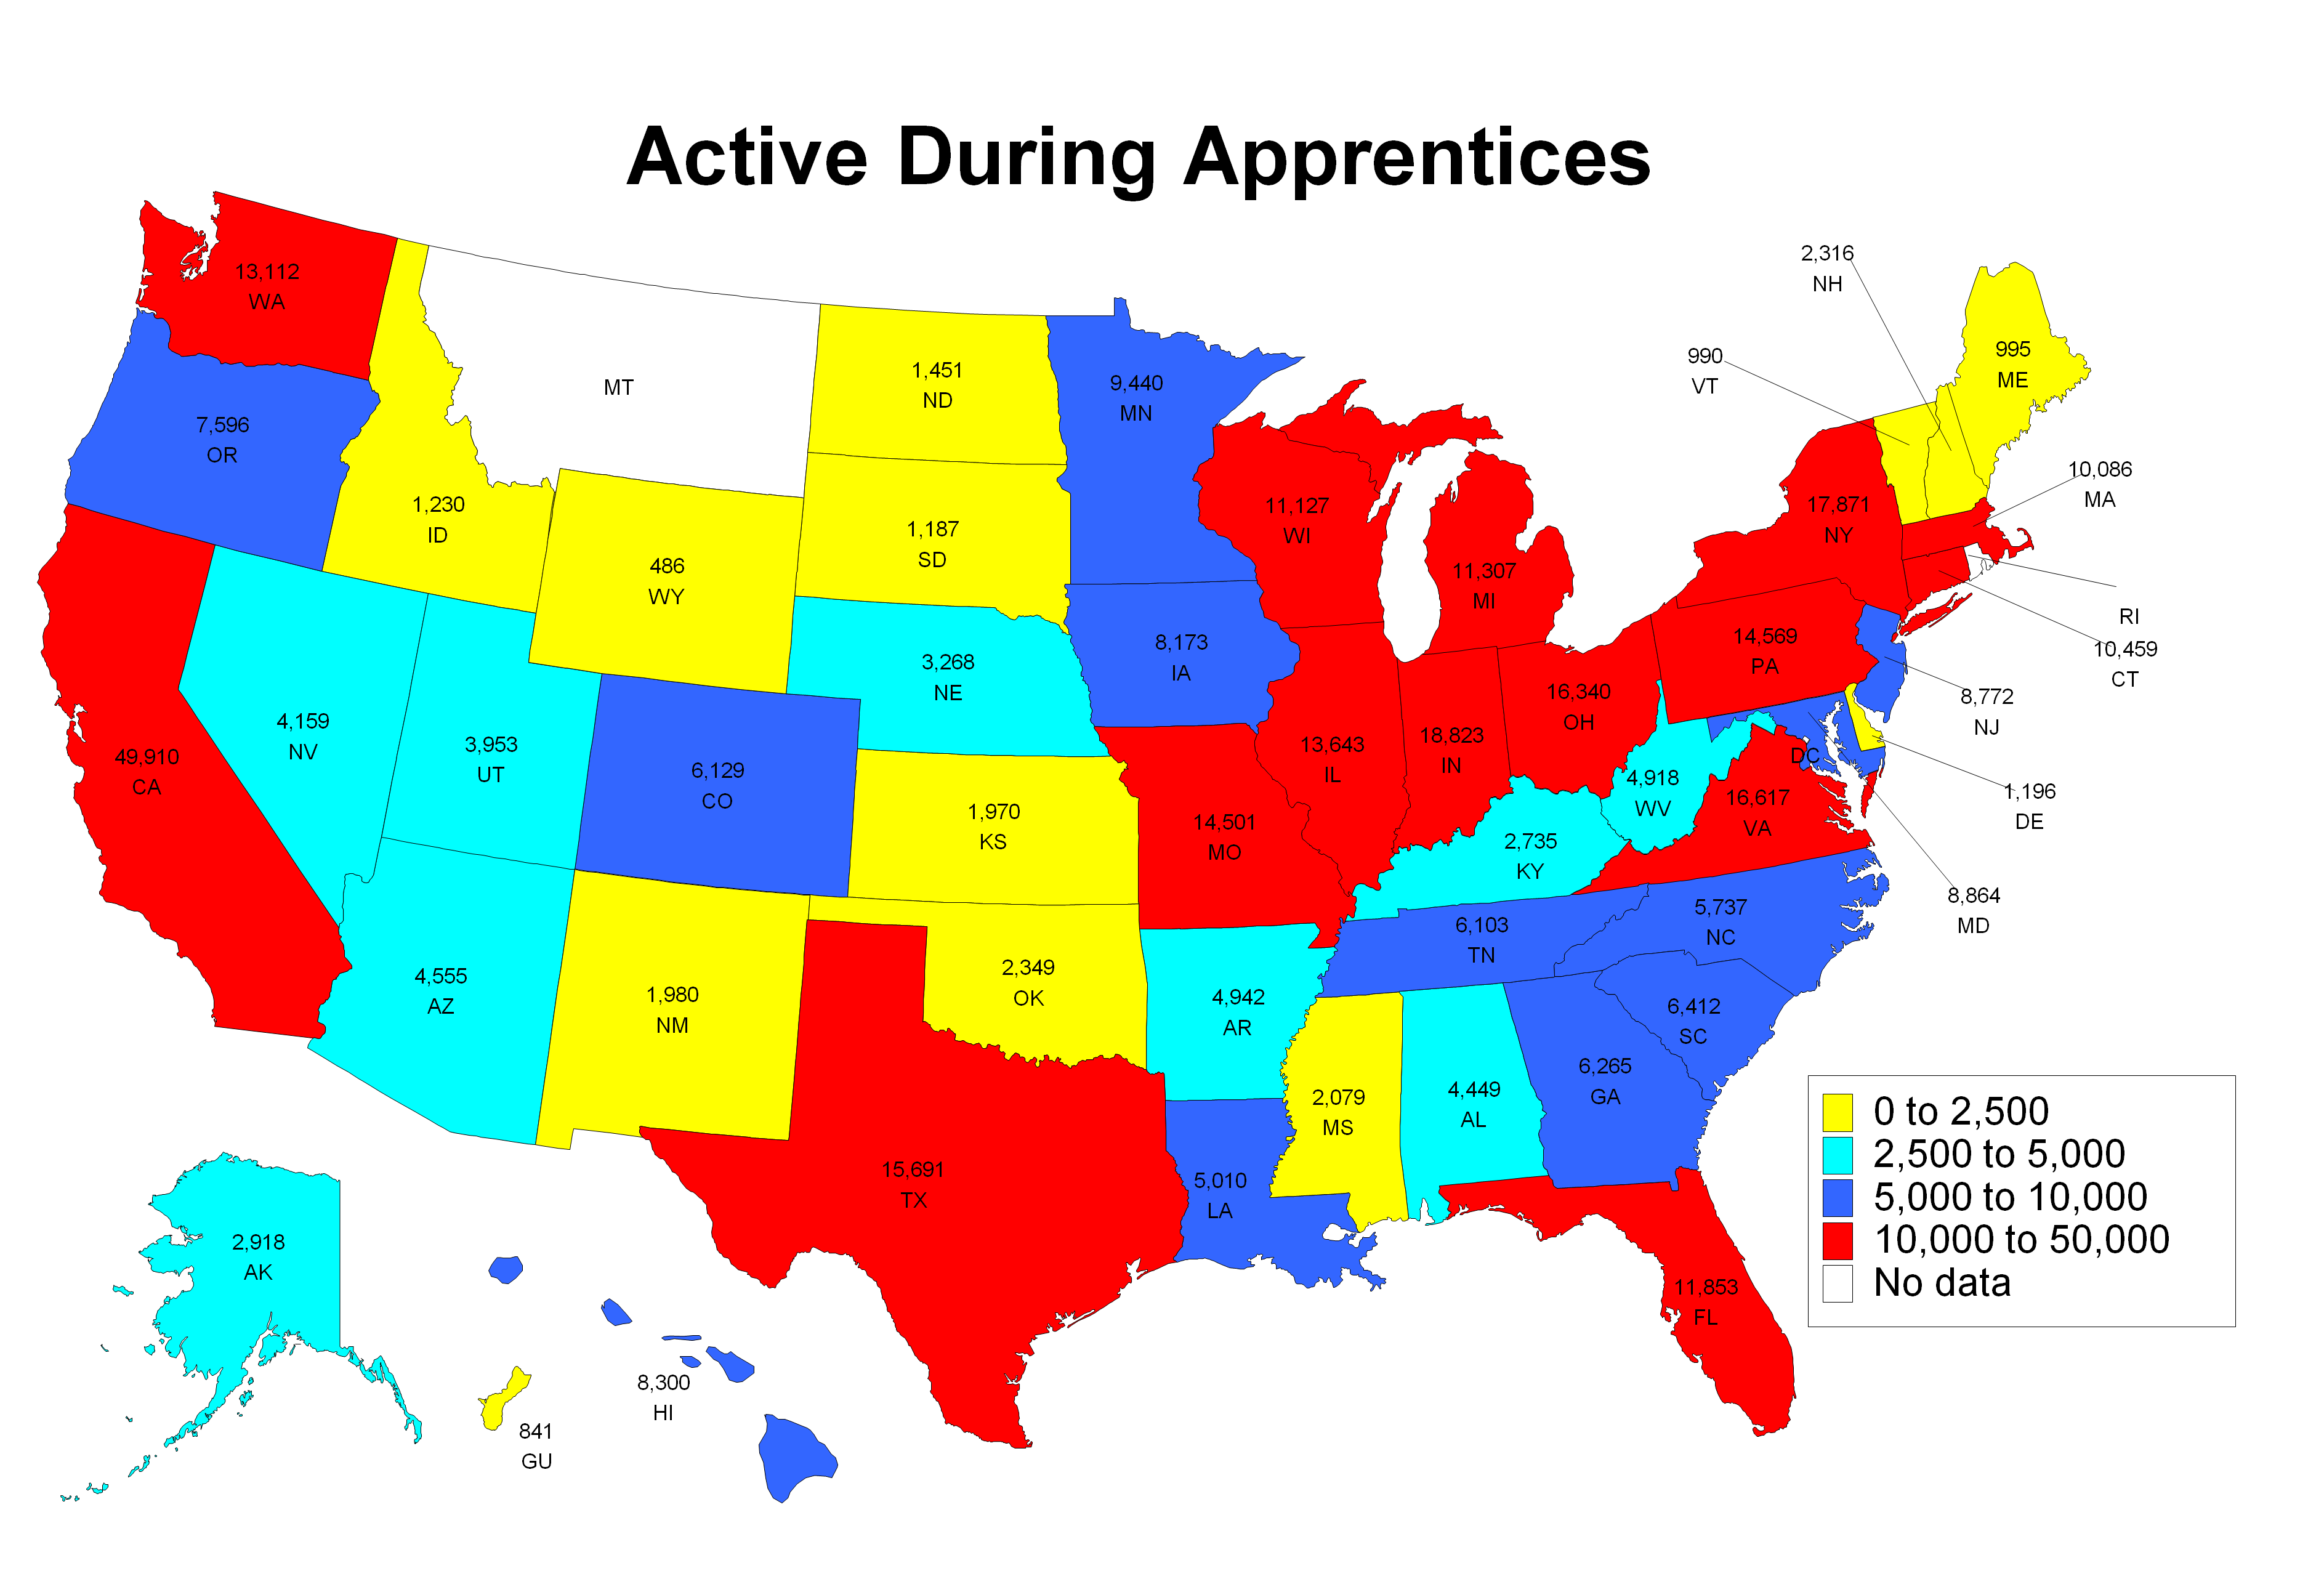 Active During Apprentices 2013